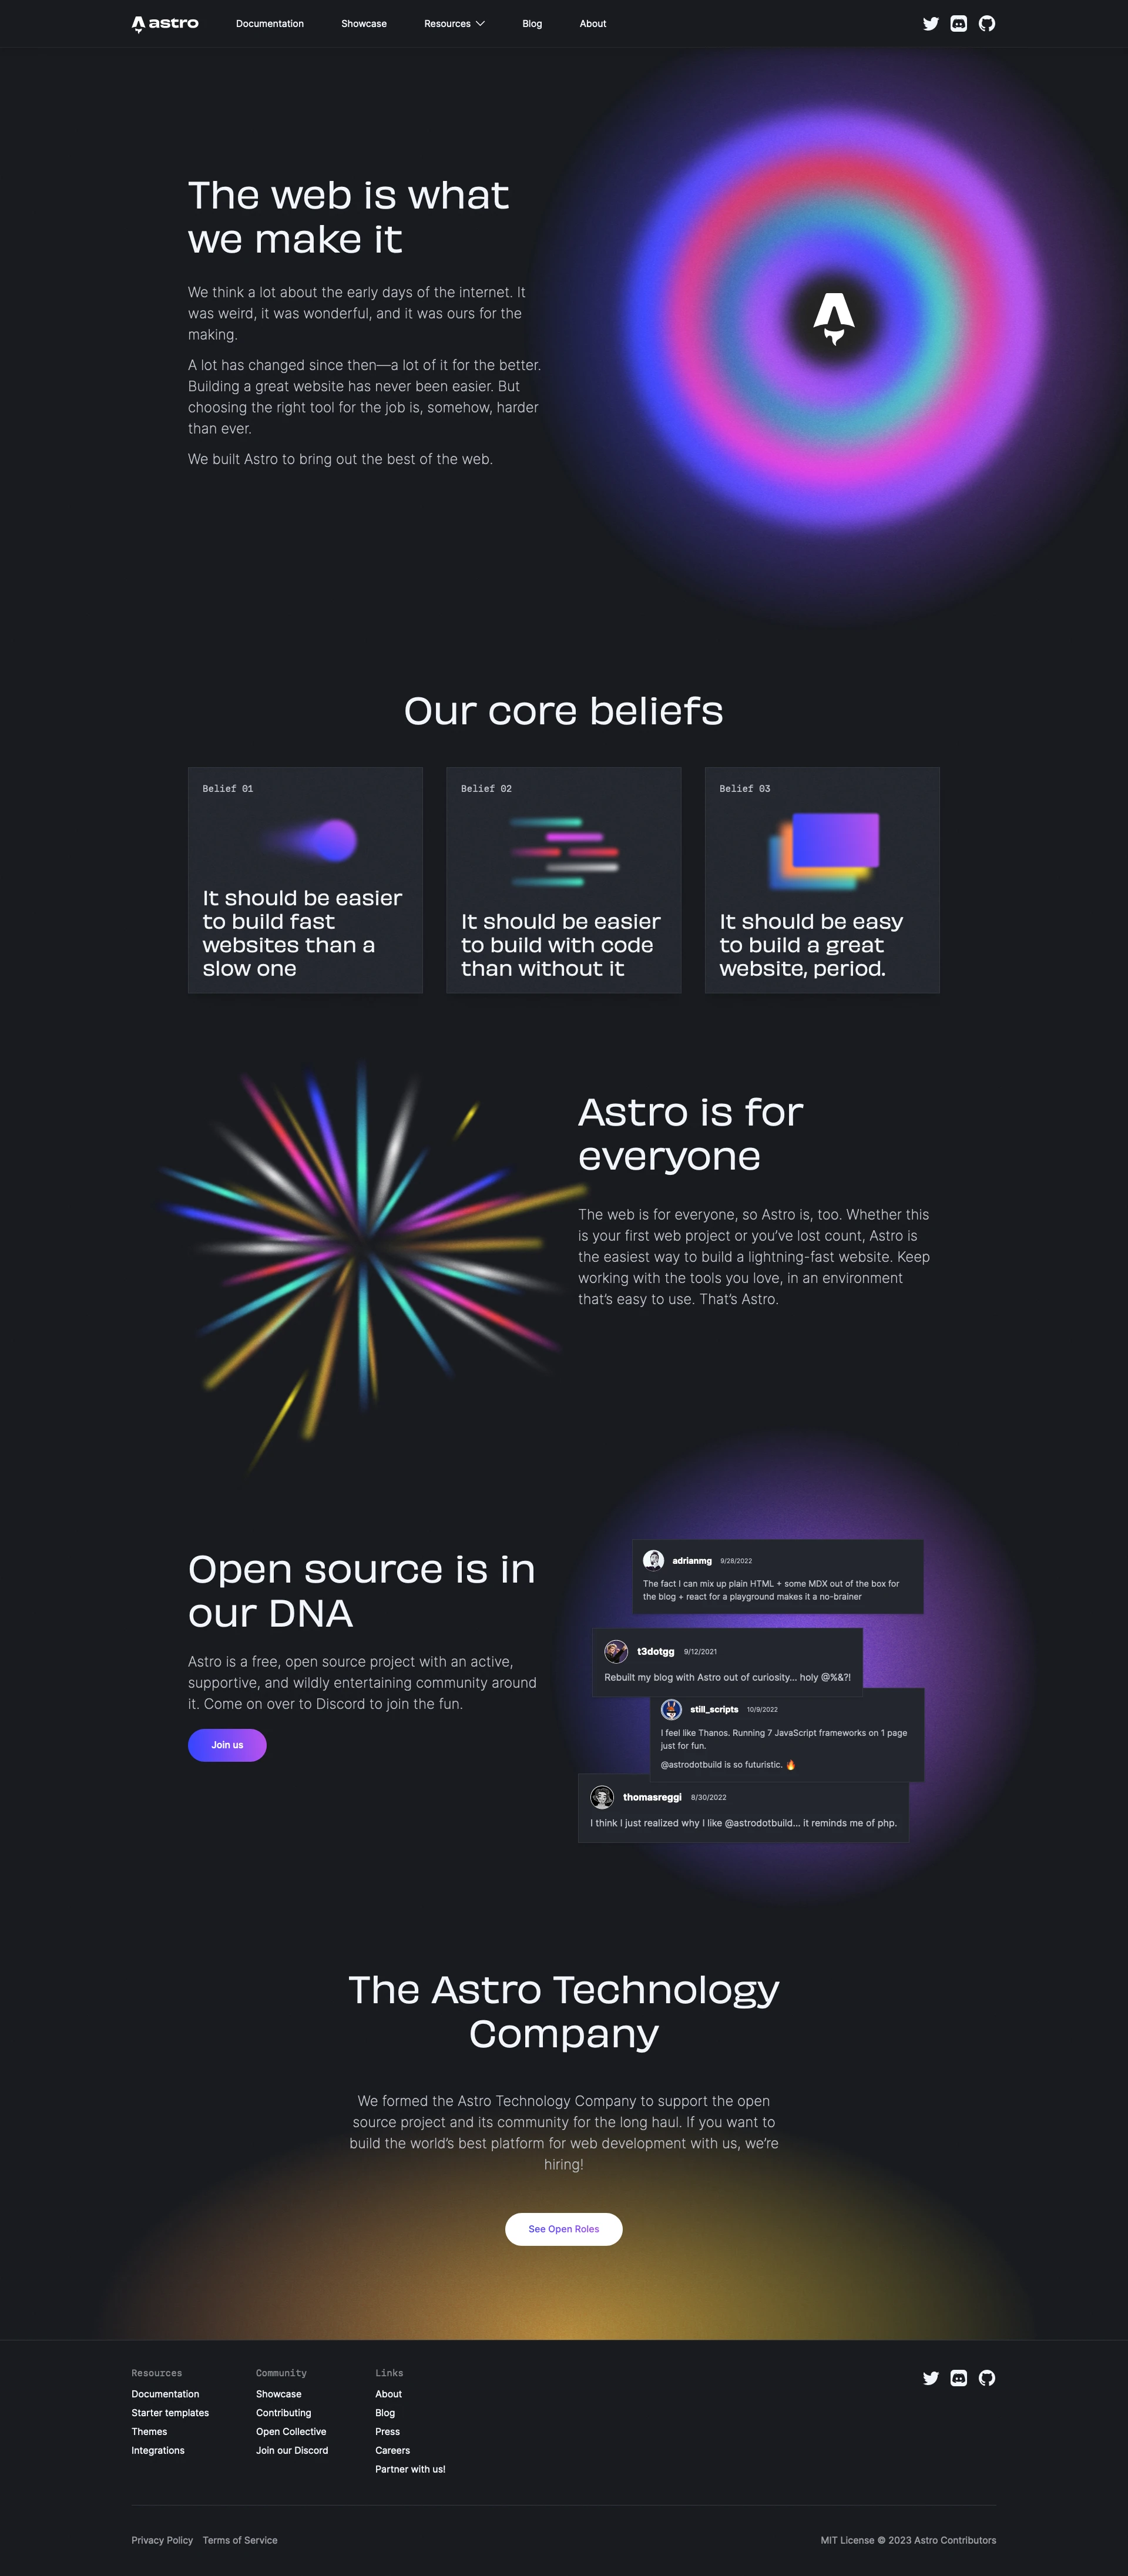 Astro Landing Page Example: Astro is an all-in-one framework for building fast websites faster. Grab content from anywhere, deploy everywhere, and show the web what you've got.